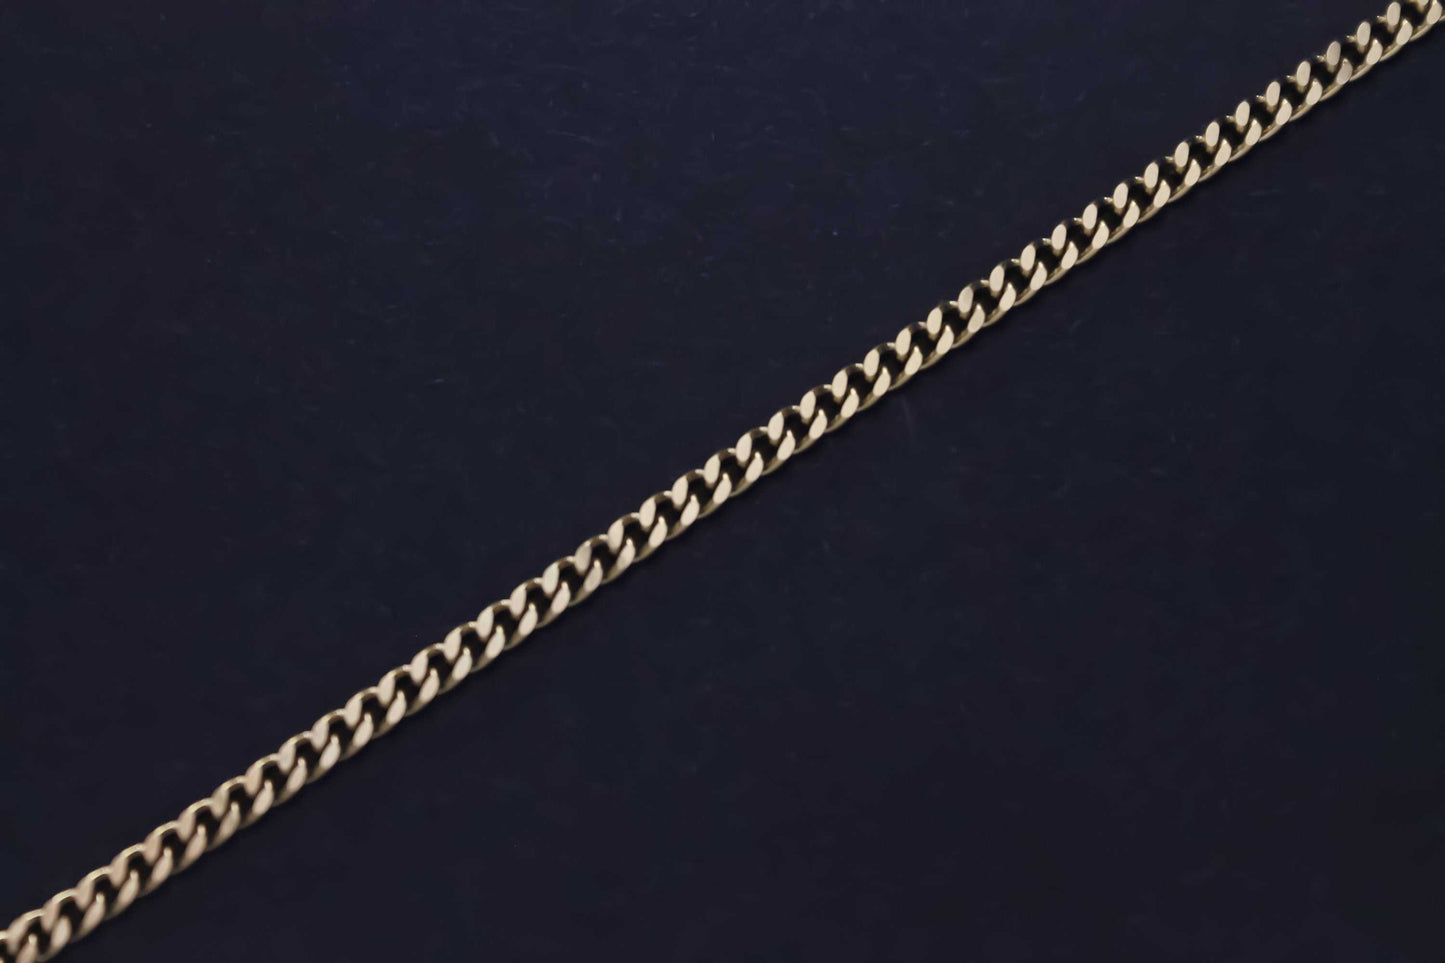 CRW Minimalistic Mountain Necklace with 3mm miami cuban link chain in gold - Necklaces for Women - Necklace for Men - Necklace with Pendant